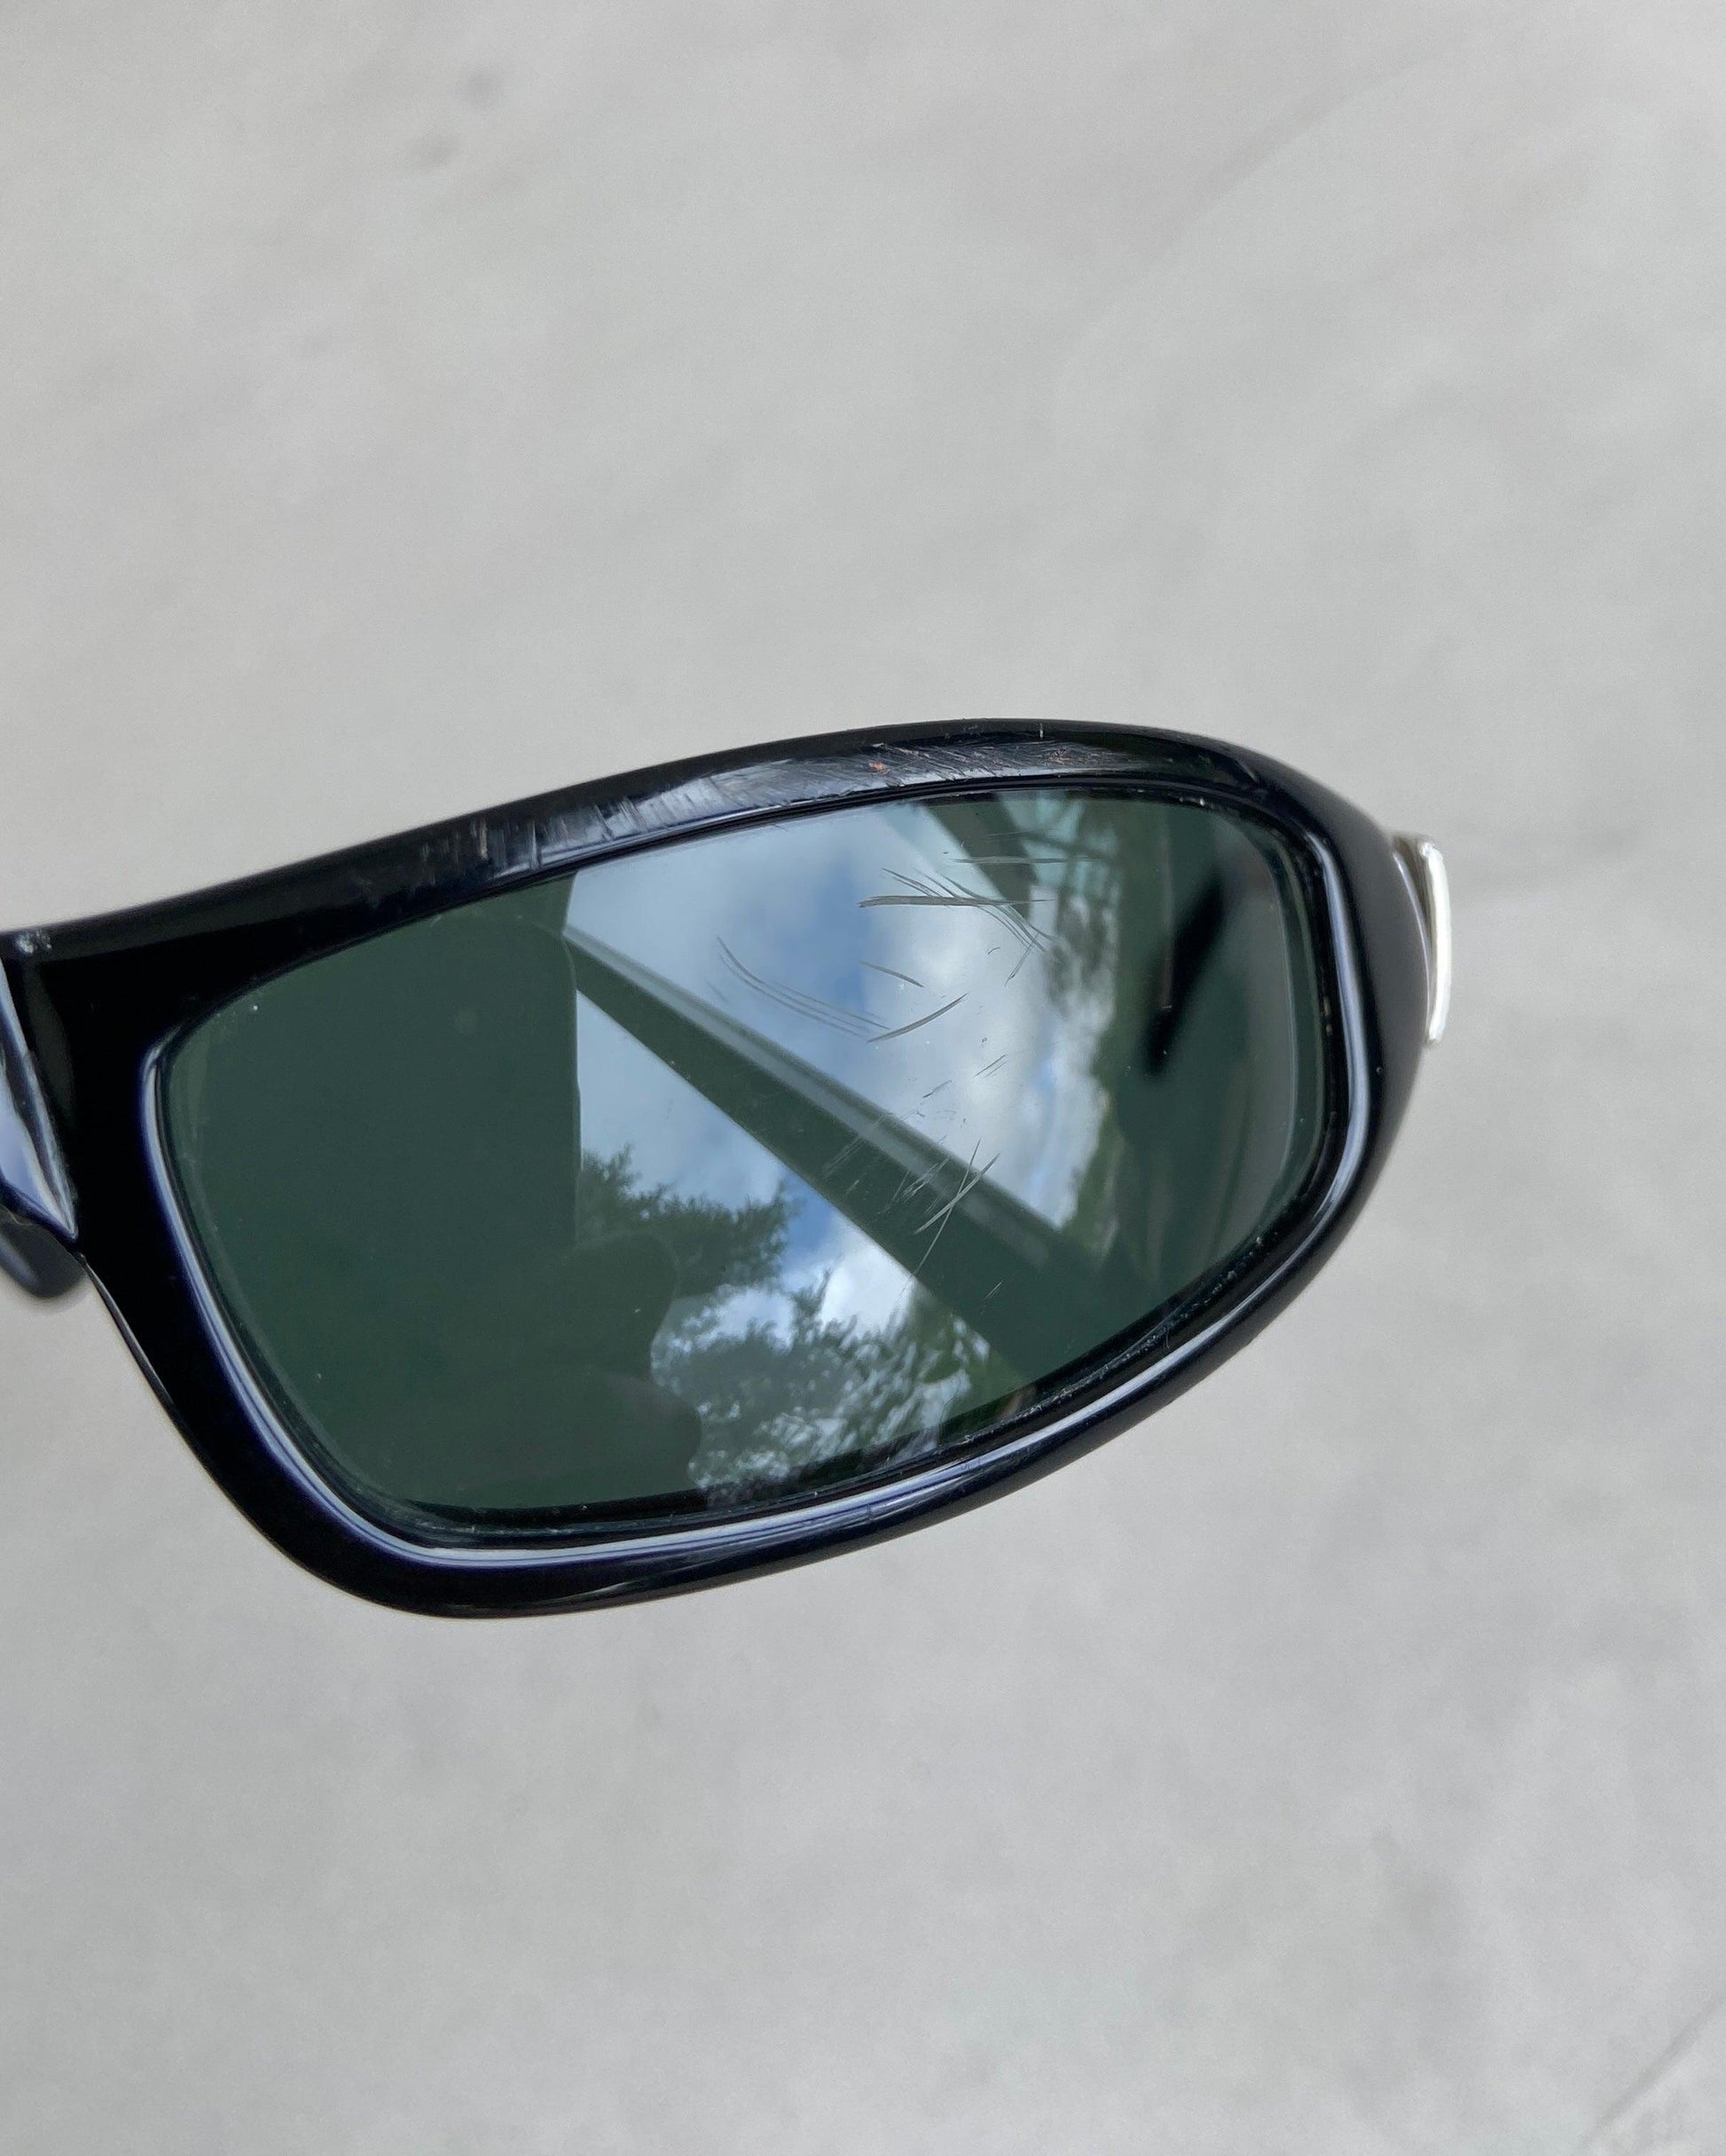 DIESEL 2000'S 'CIRCLE' SUNGLASSES - Known Source